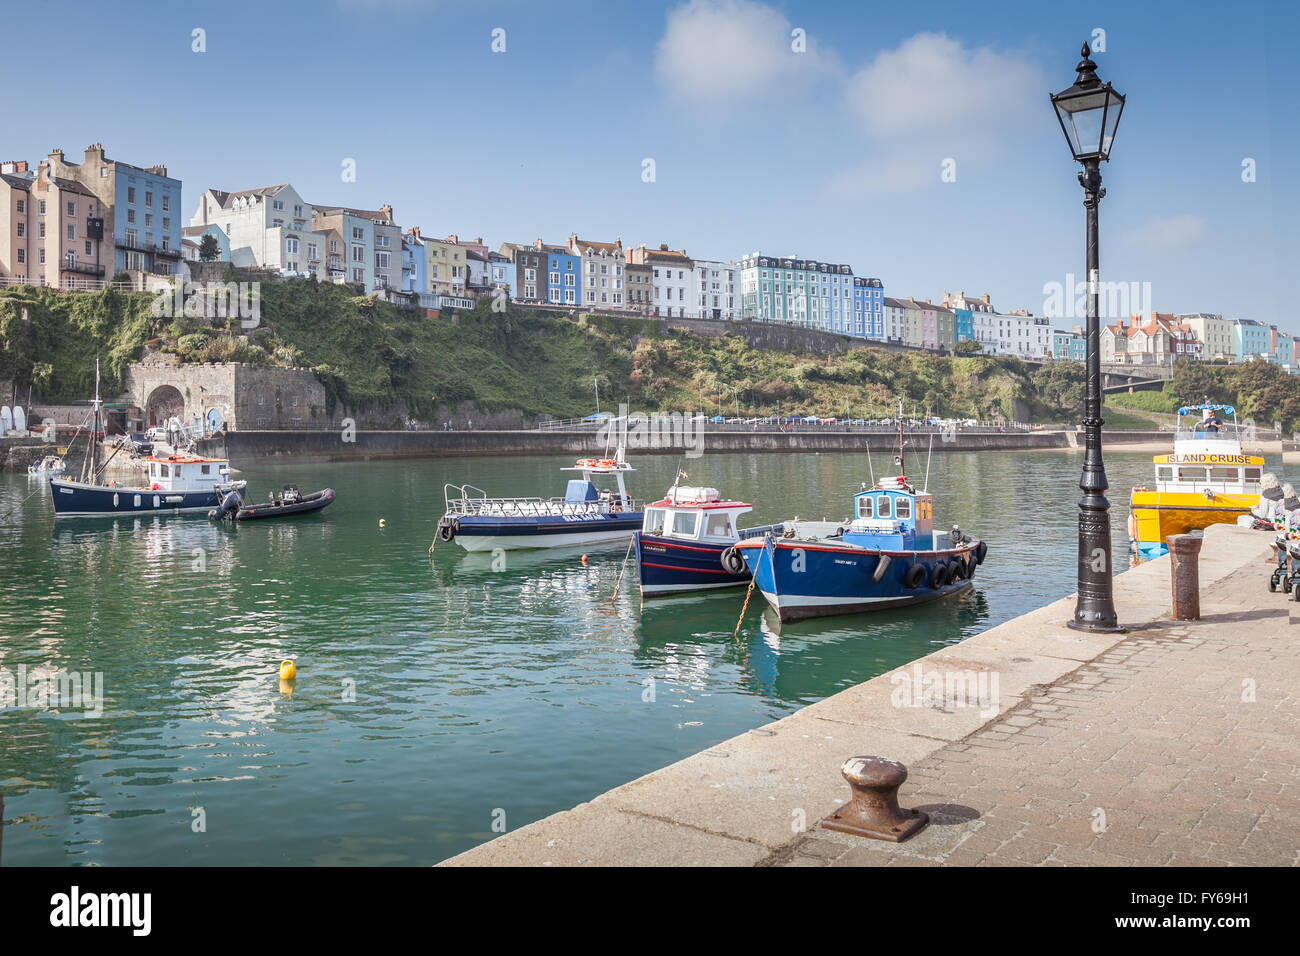 Boats and buildings in the harbor at Tenby, Pembrokeshire, Wales.  Taken on a sunny day. Stock Photo